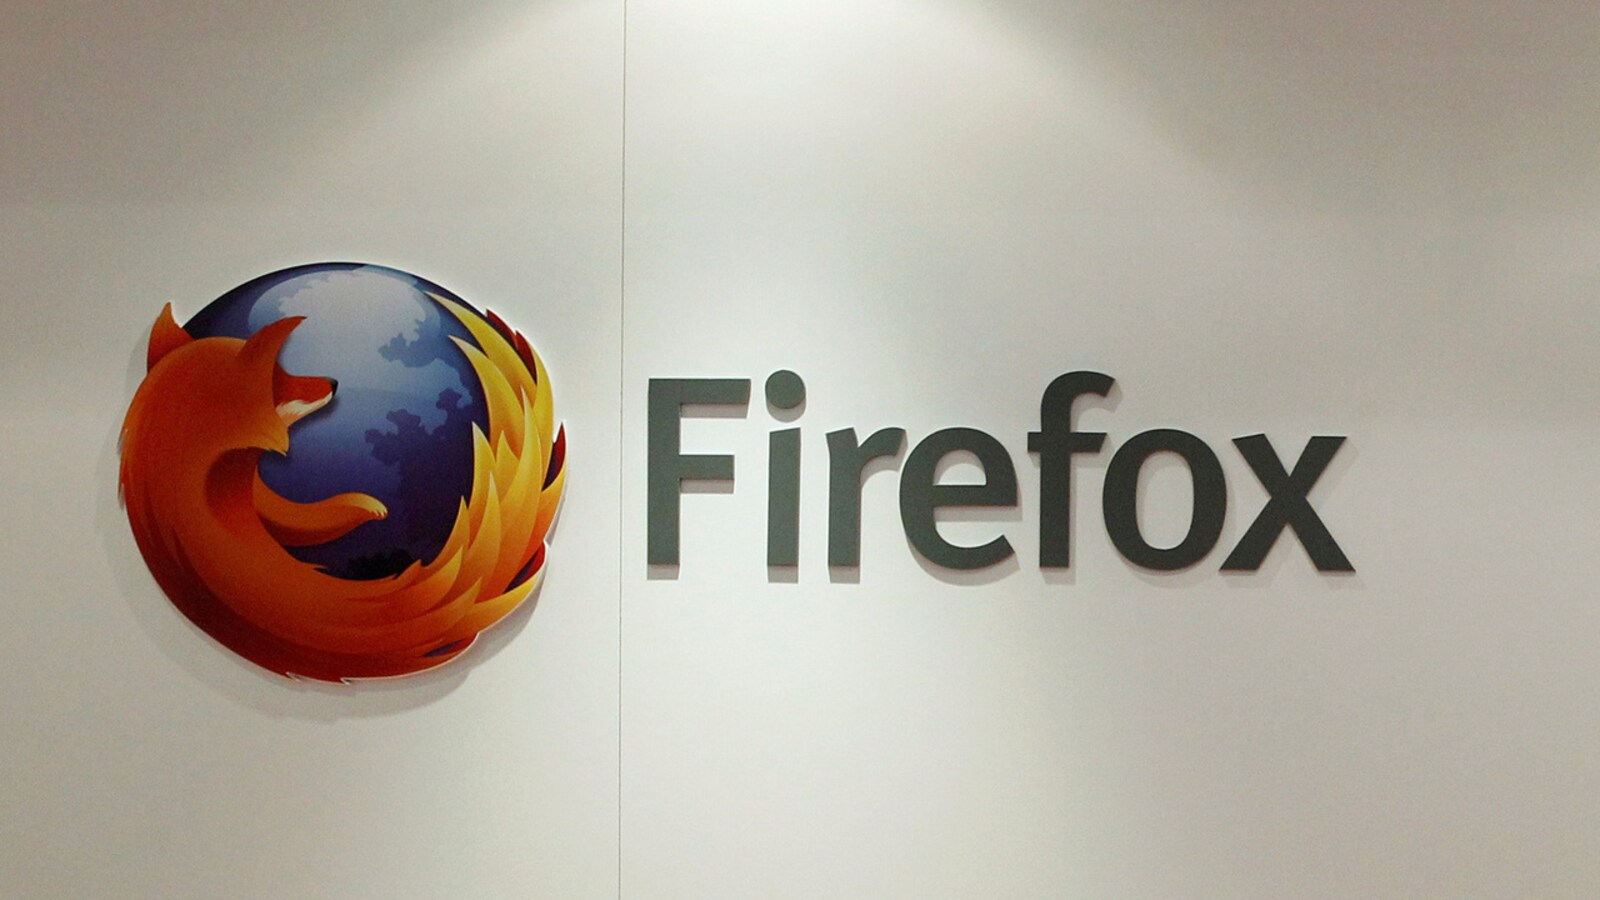 How to Block Cryptominers, Fingerprinters, and Trackers in Firefox